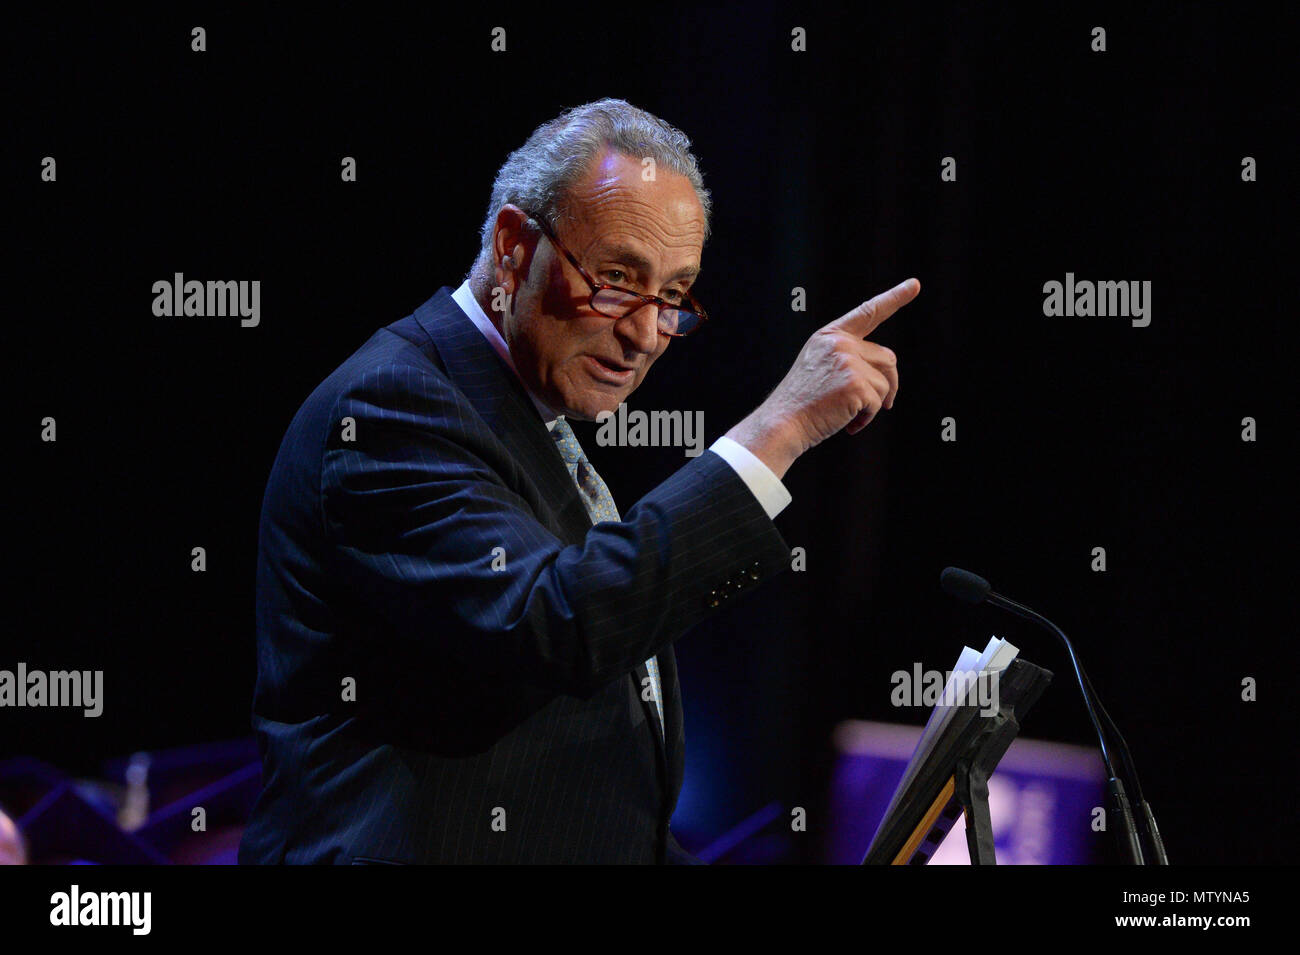 New York, USA. 30th May 2018. U.S. Senator Chuck Schumer speaks at the Hunter College commencement ceremony  on May 30, 2018 at Radio City Music Hall in New York. Credit: Erik Pendzich/Alamy Live News Stock Photo